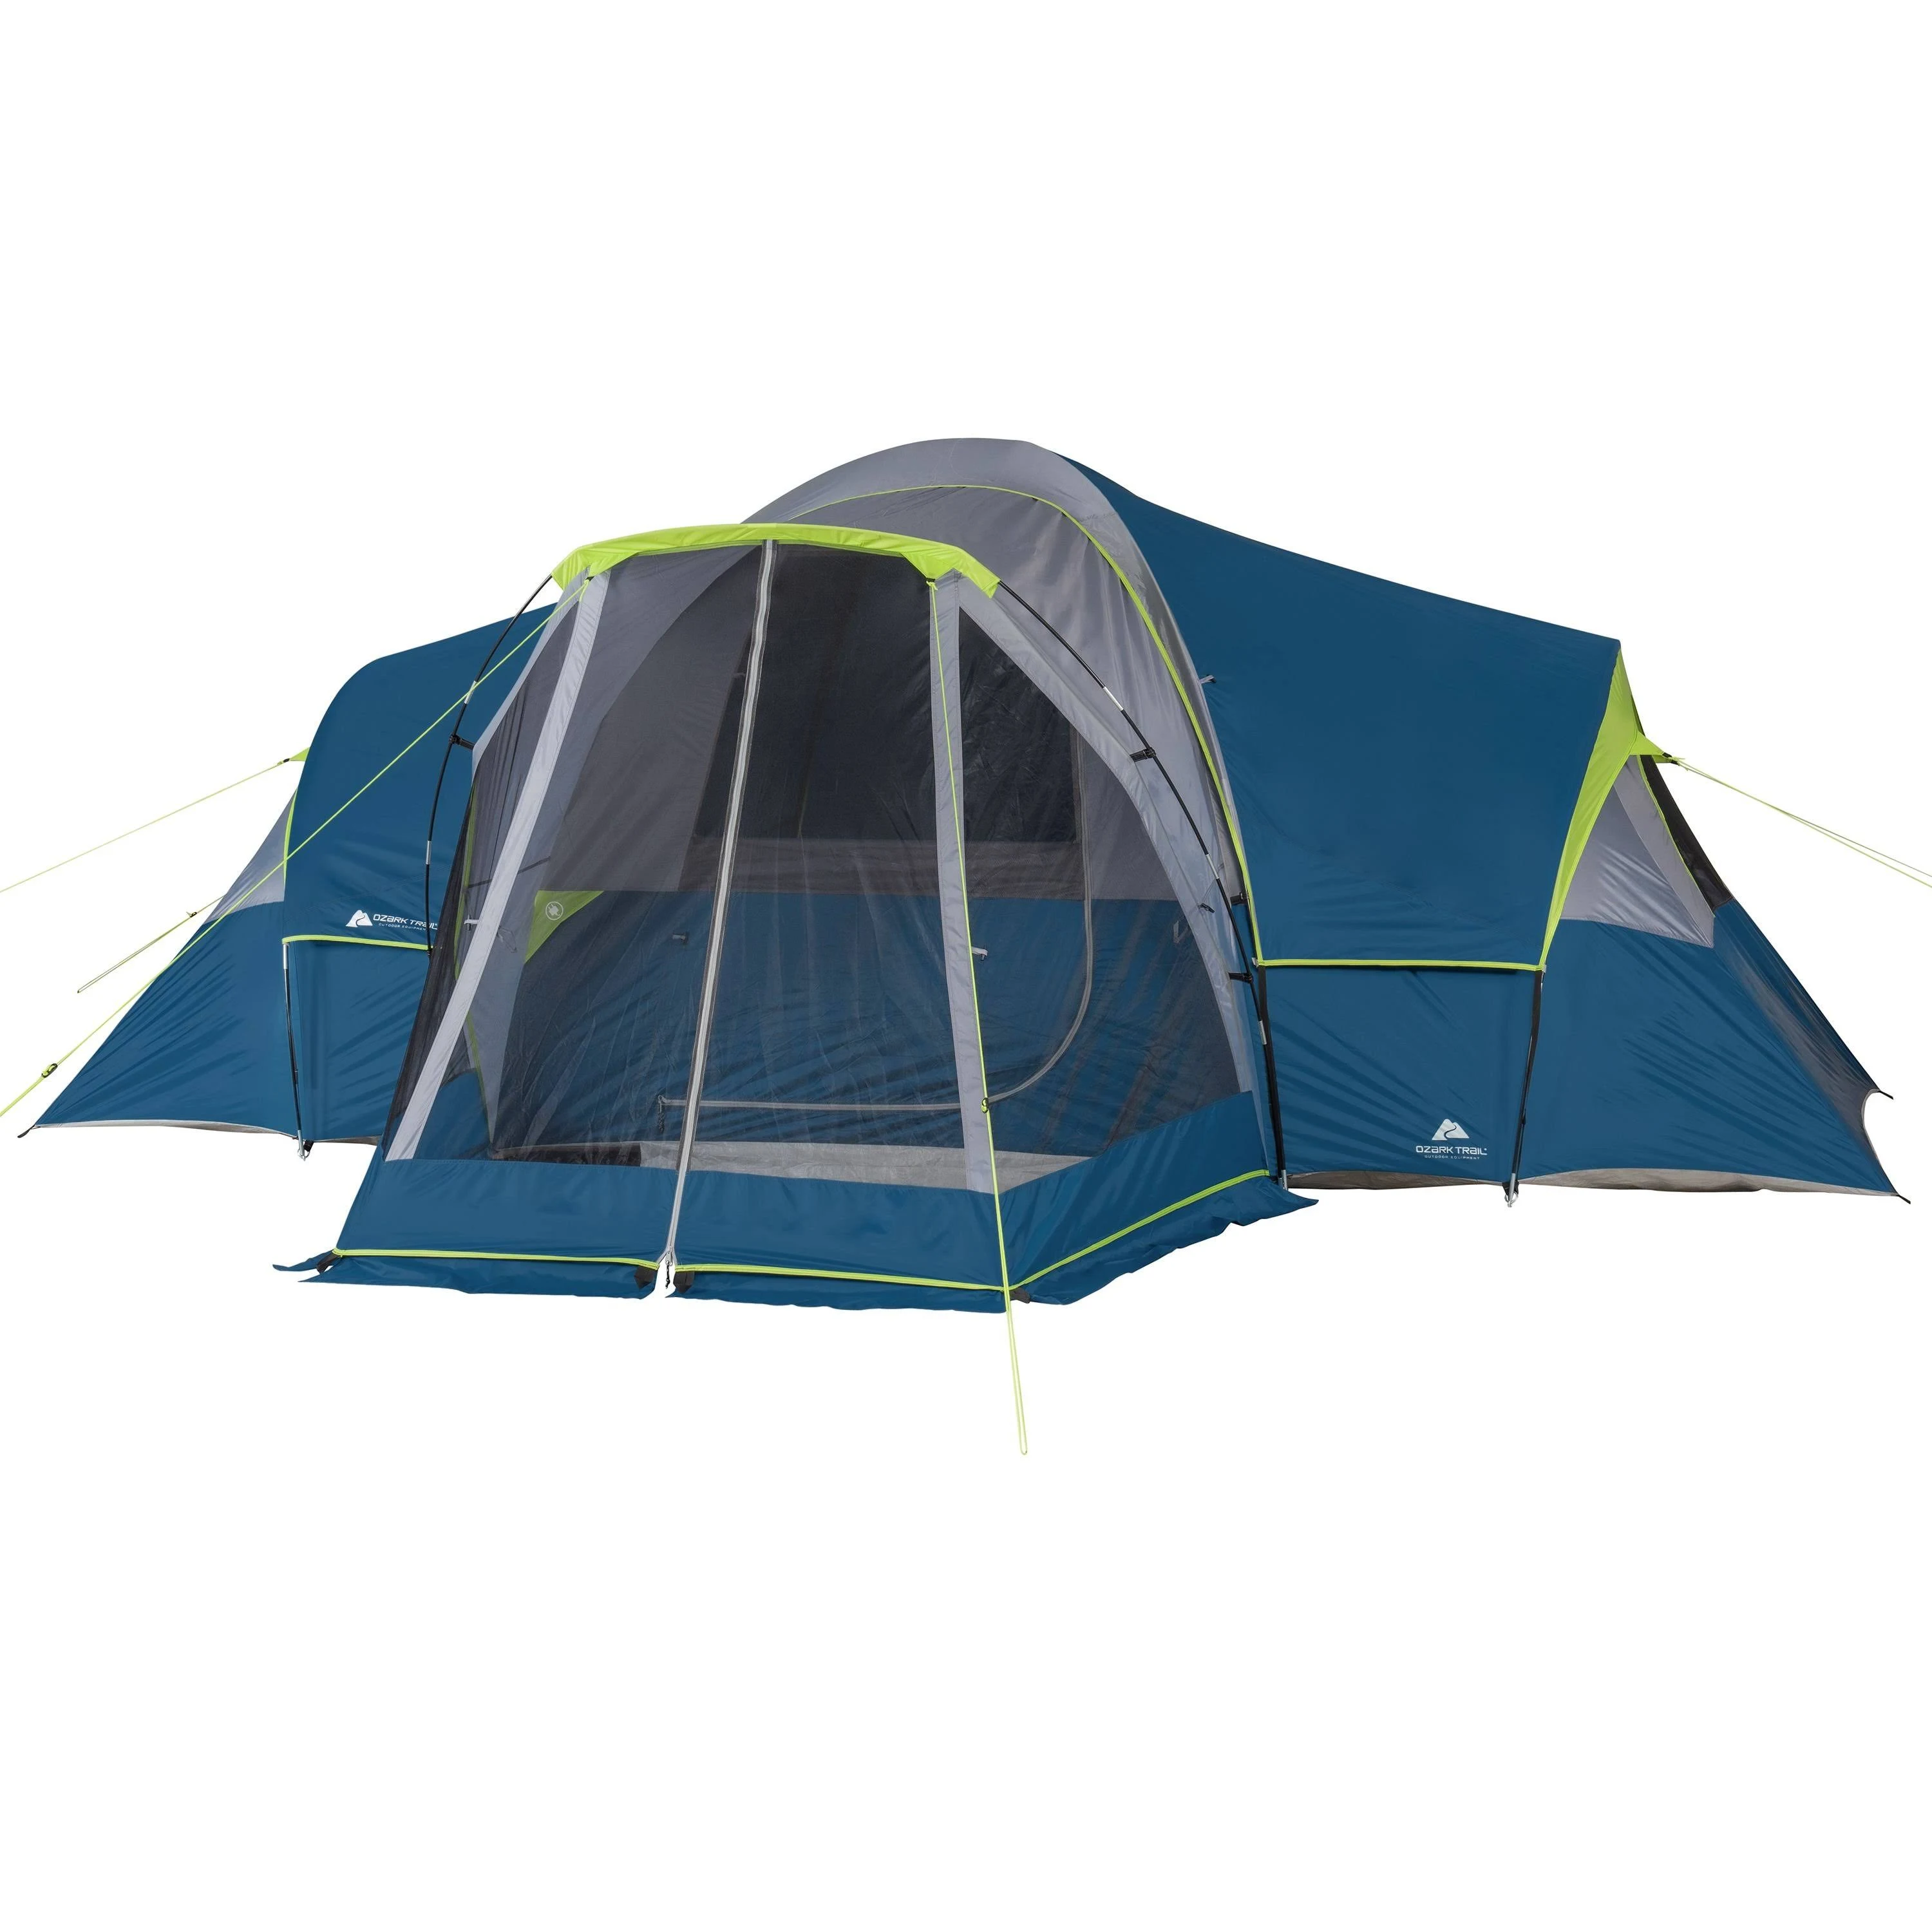 Ozark Trail 10 Person Family Camping Tent, with 3 Rooms and Screen Porch